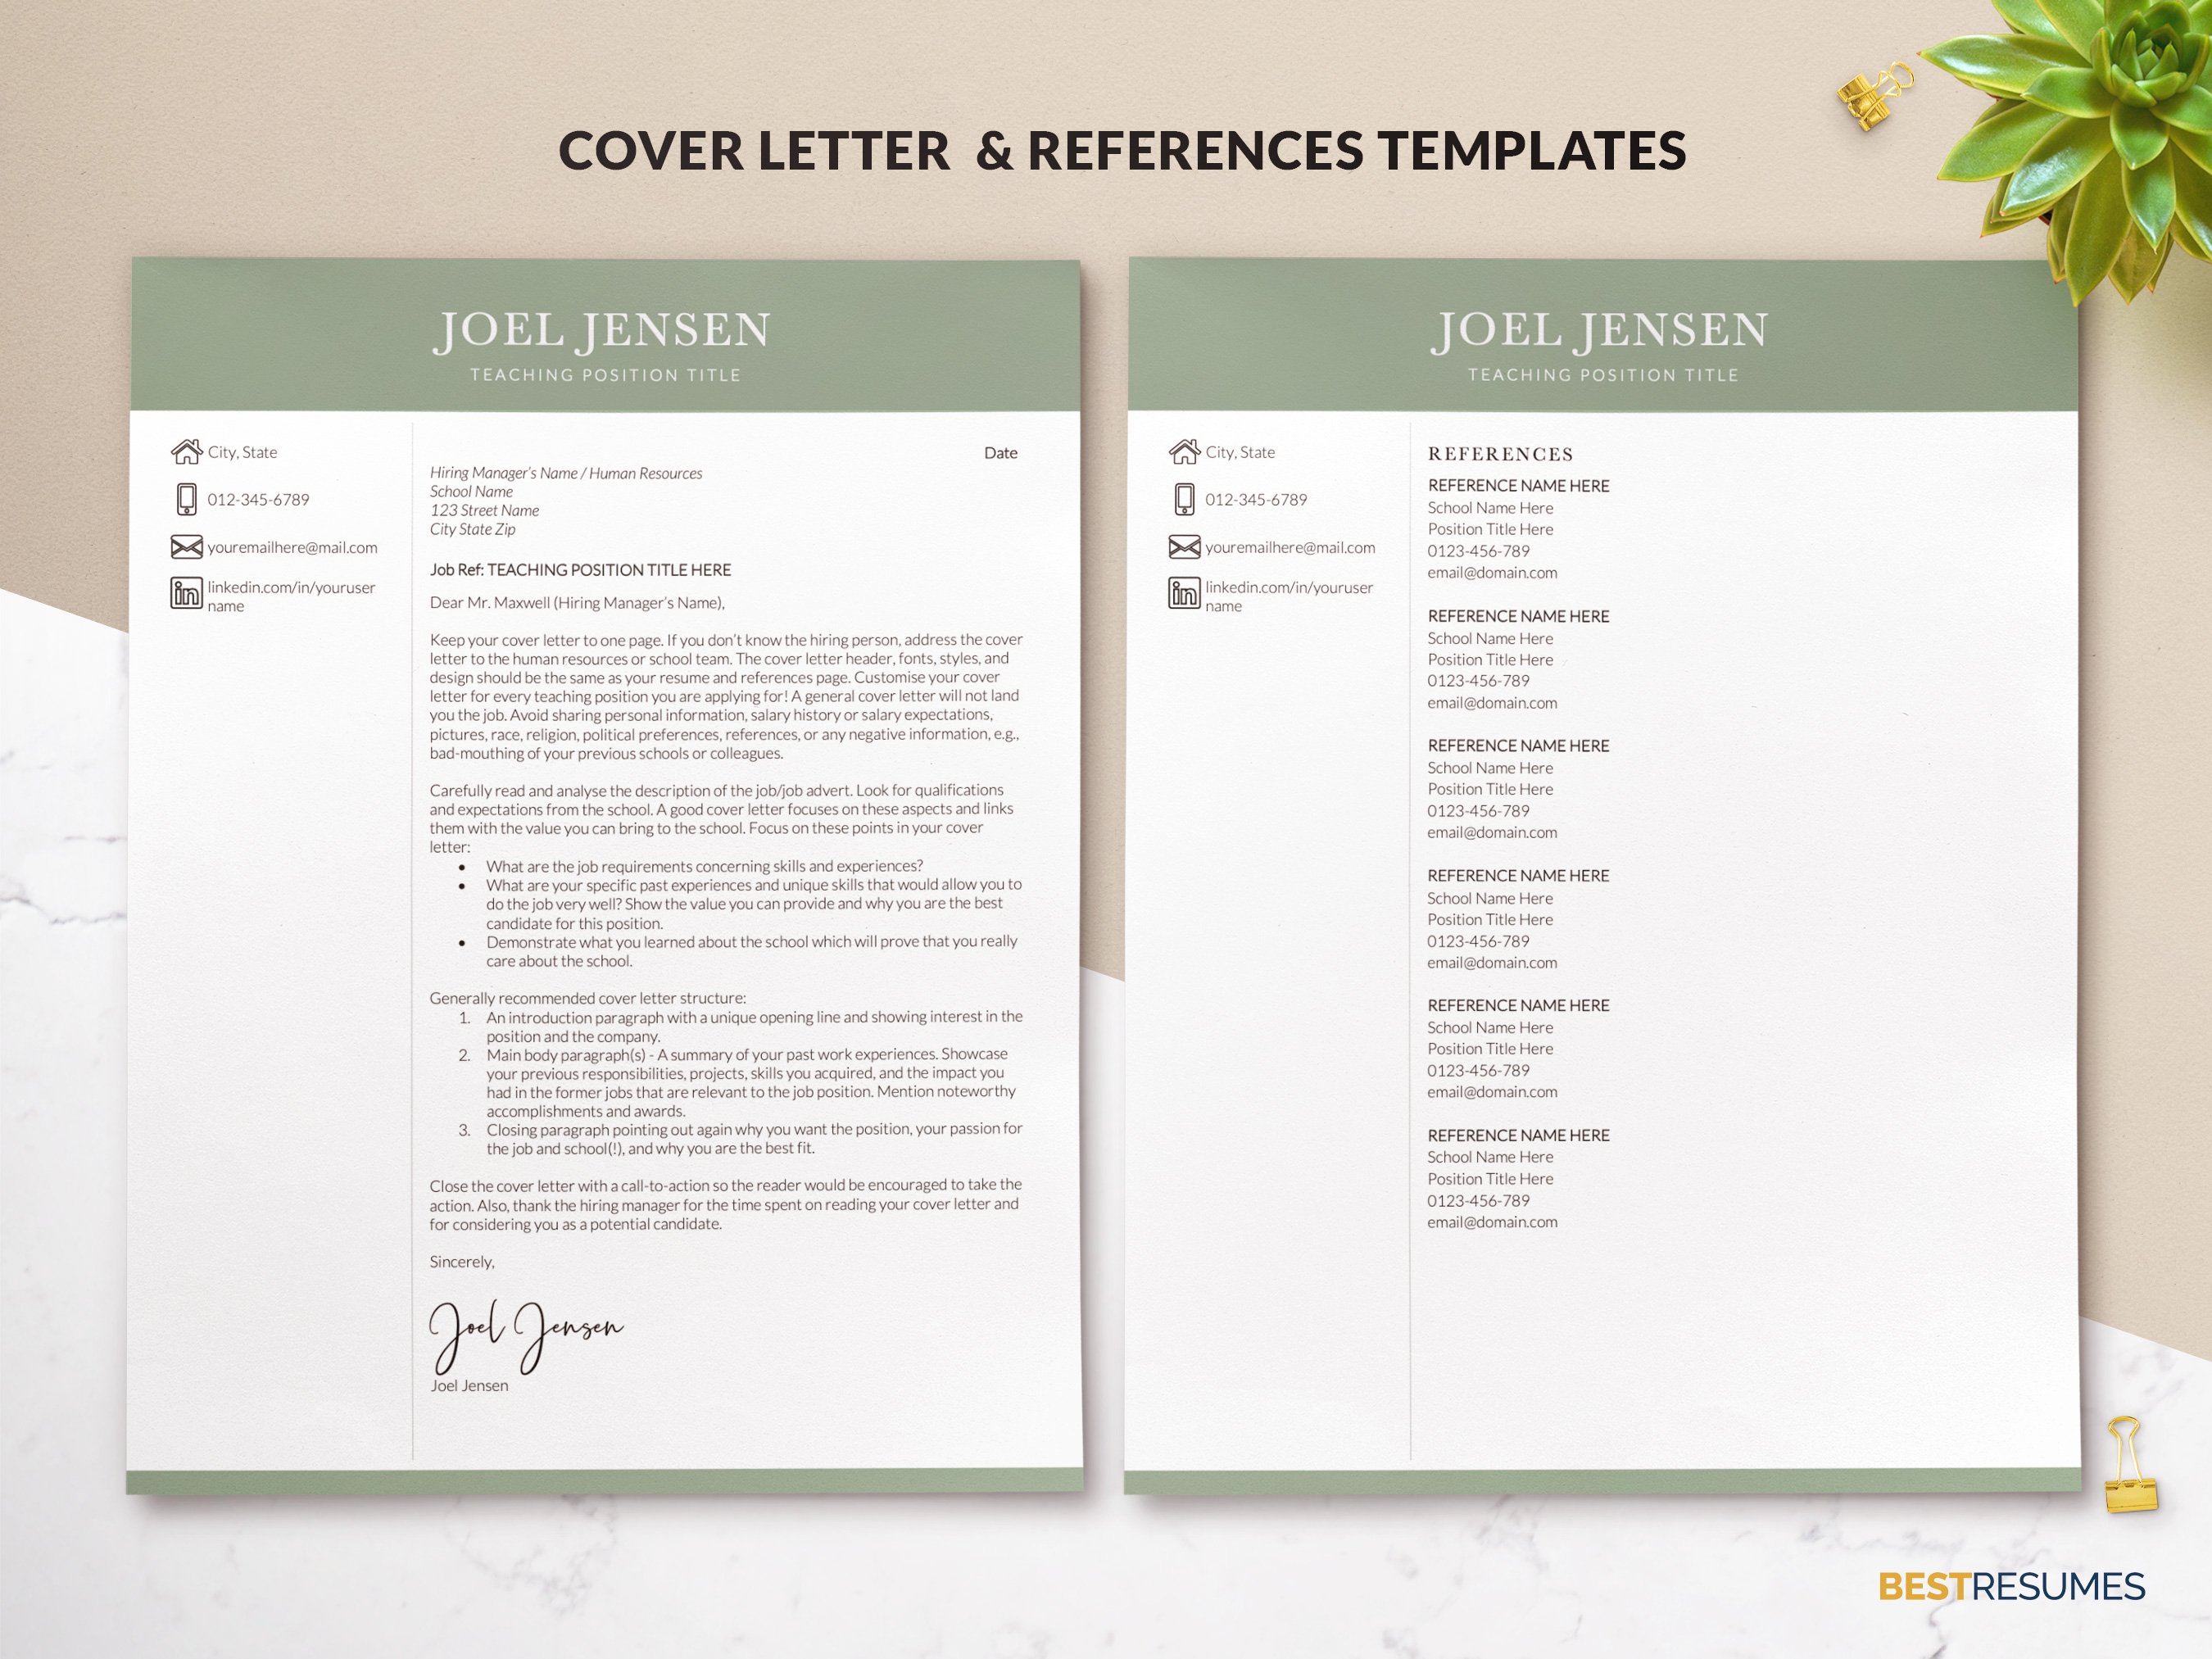 english teacher resume template cover letter references page joel jensen 612